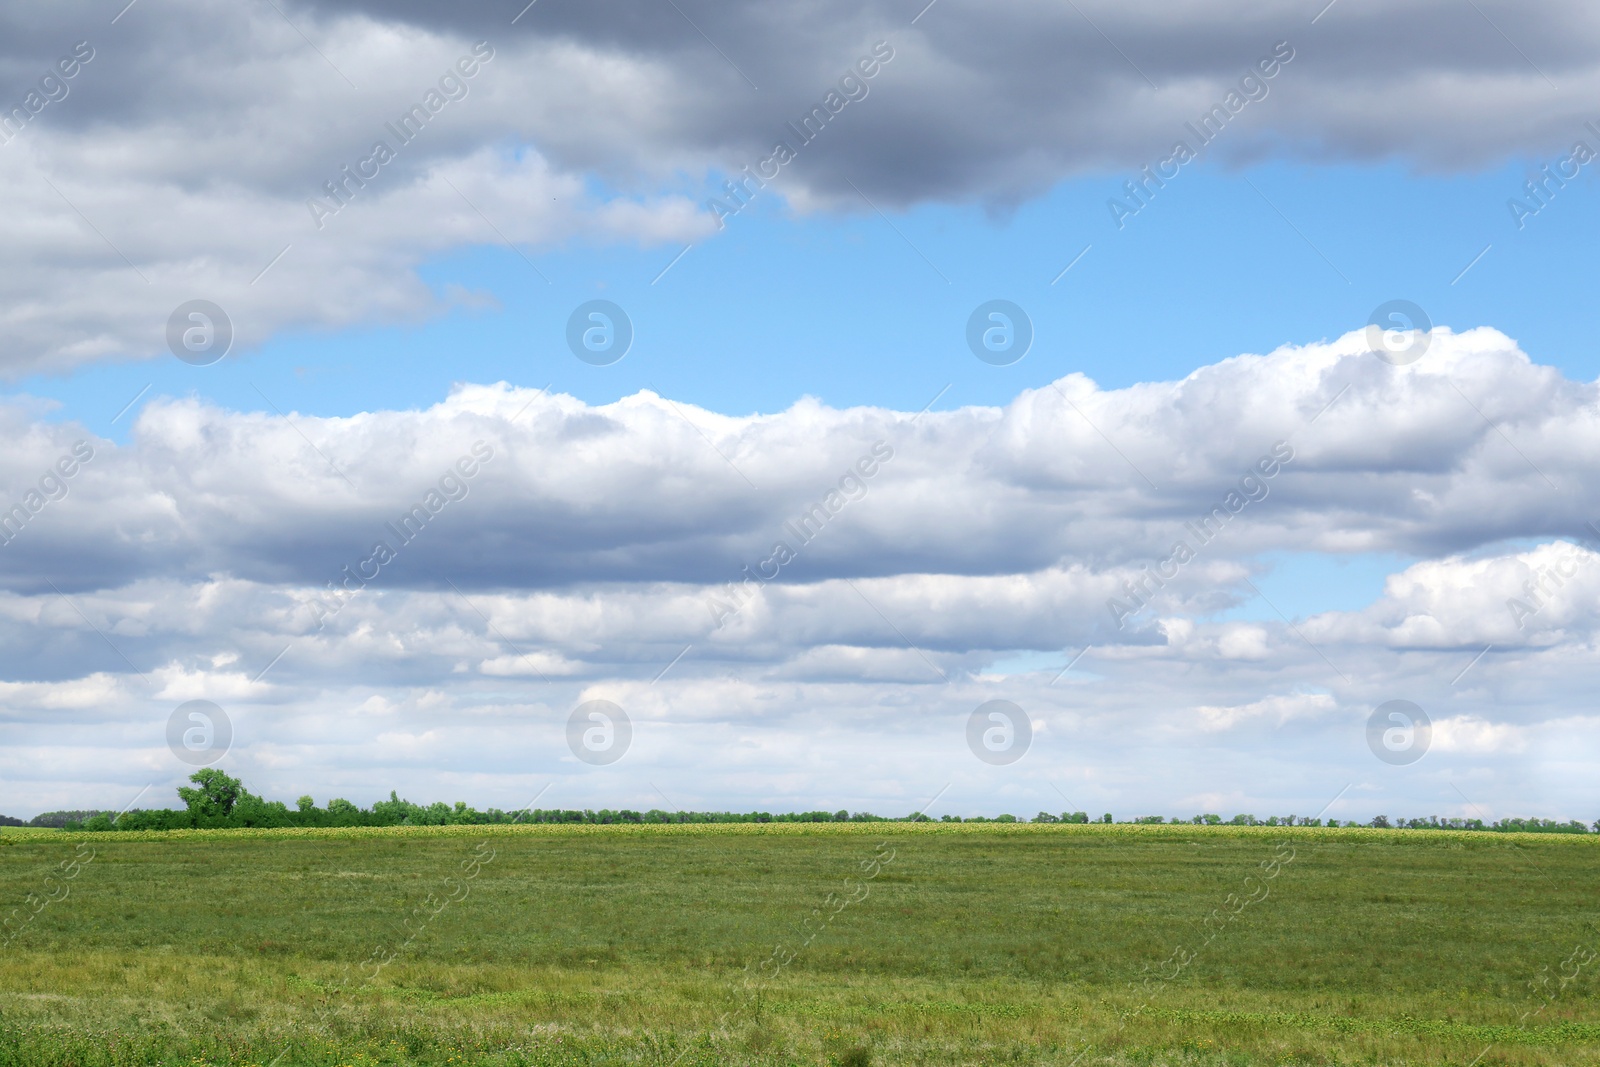 Photo of Picturesque view of beautiful fluffy clouds in light blue sky above field